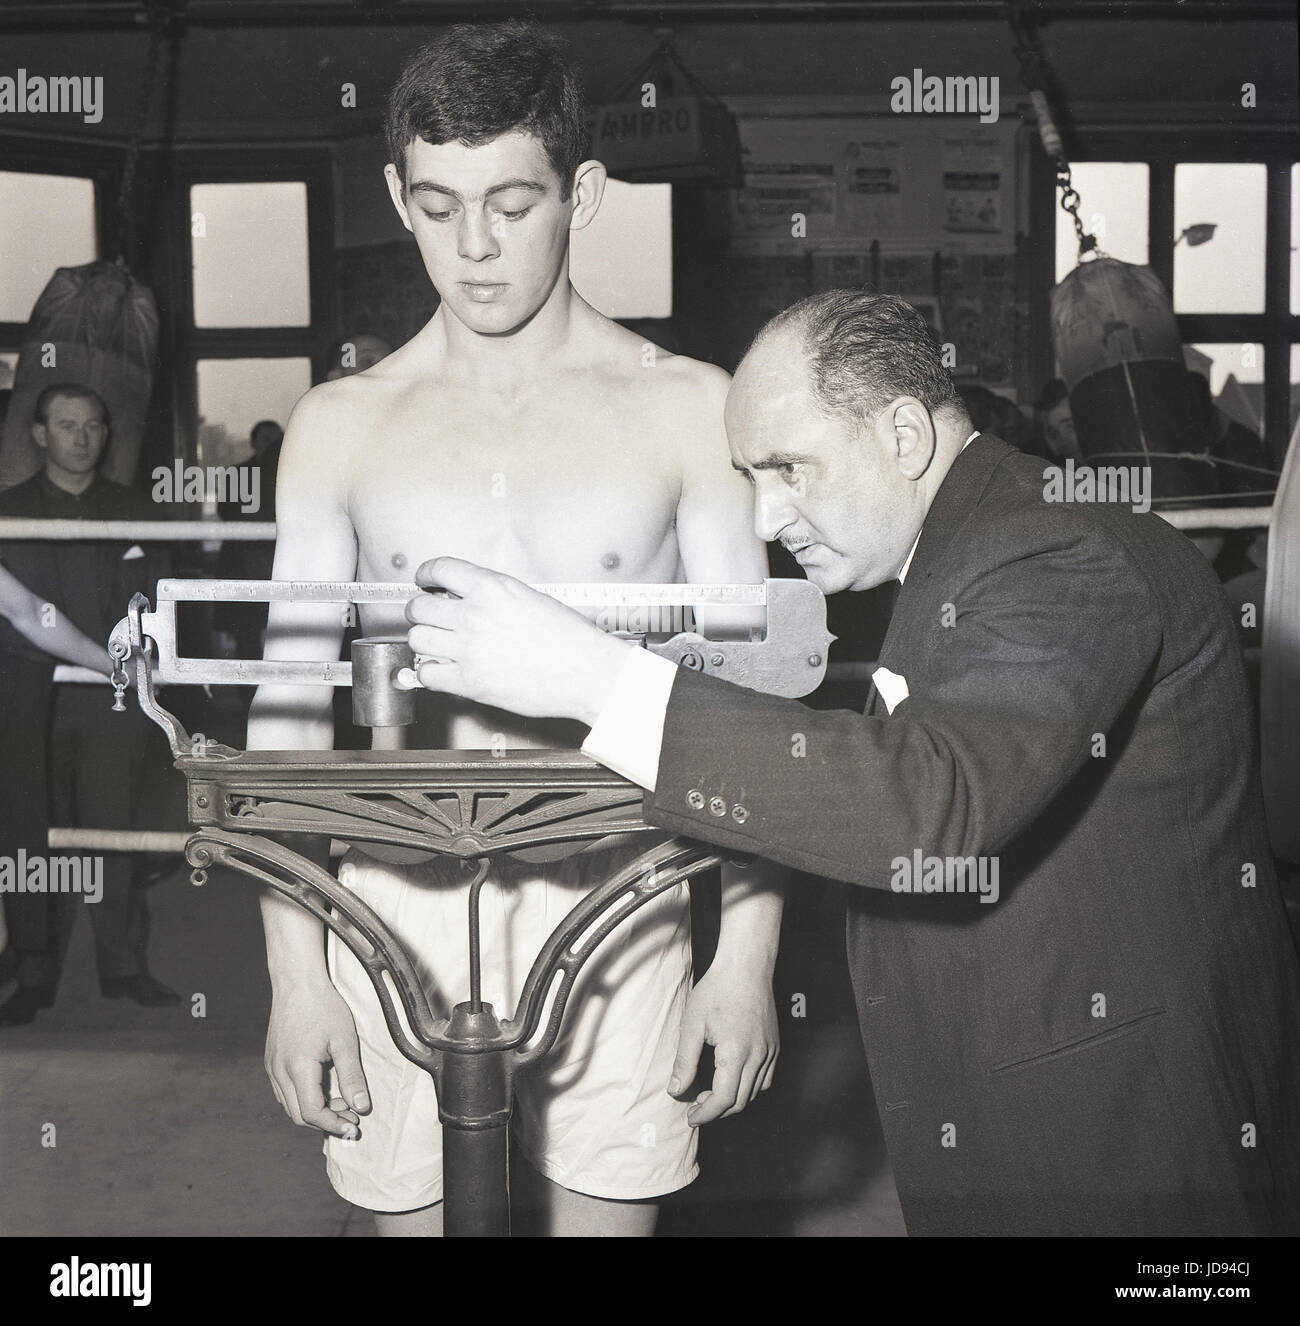 1964, the gym at the famous Thomas A Beckett public house on the Old Kent Road, Bermondsey, South London, SE1, England, picture shows a boxer in a ring being officially weighed in on mechanical scales before the contest. Stock Photo